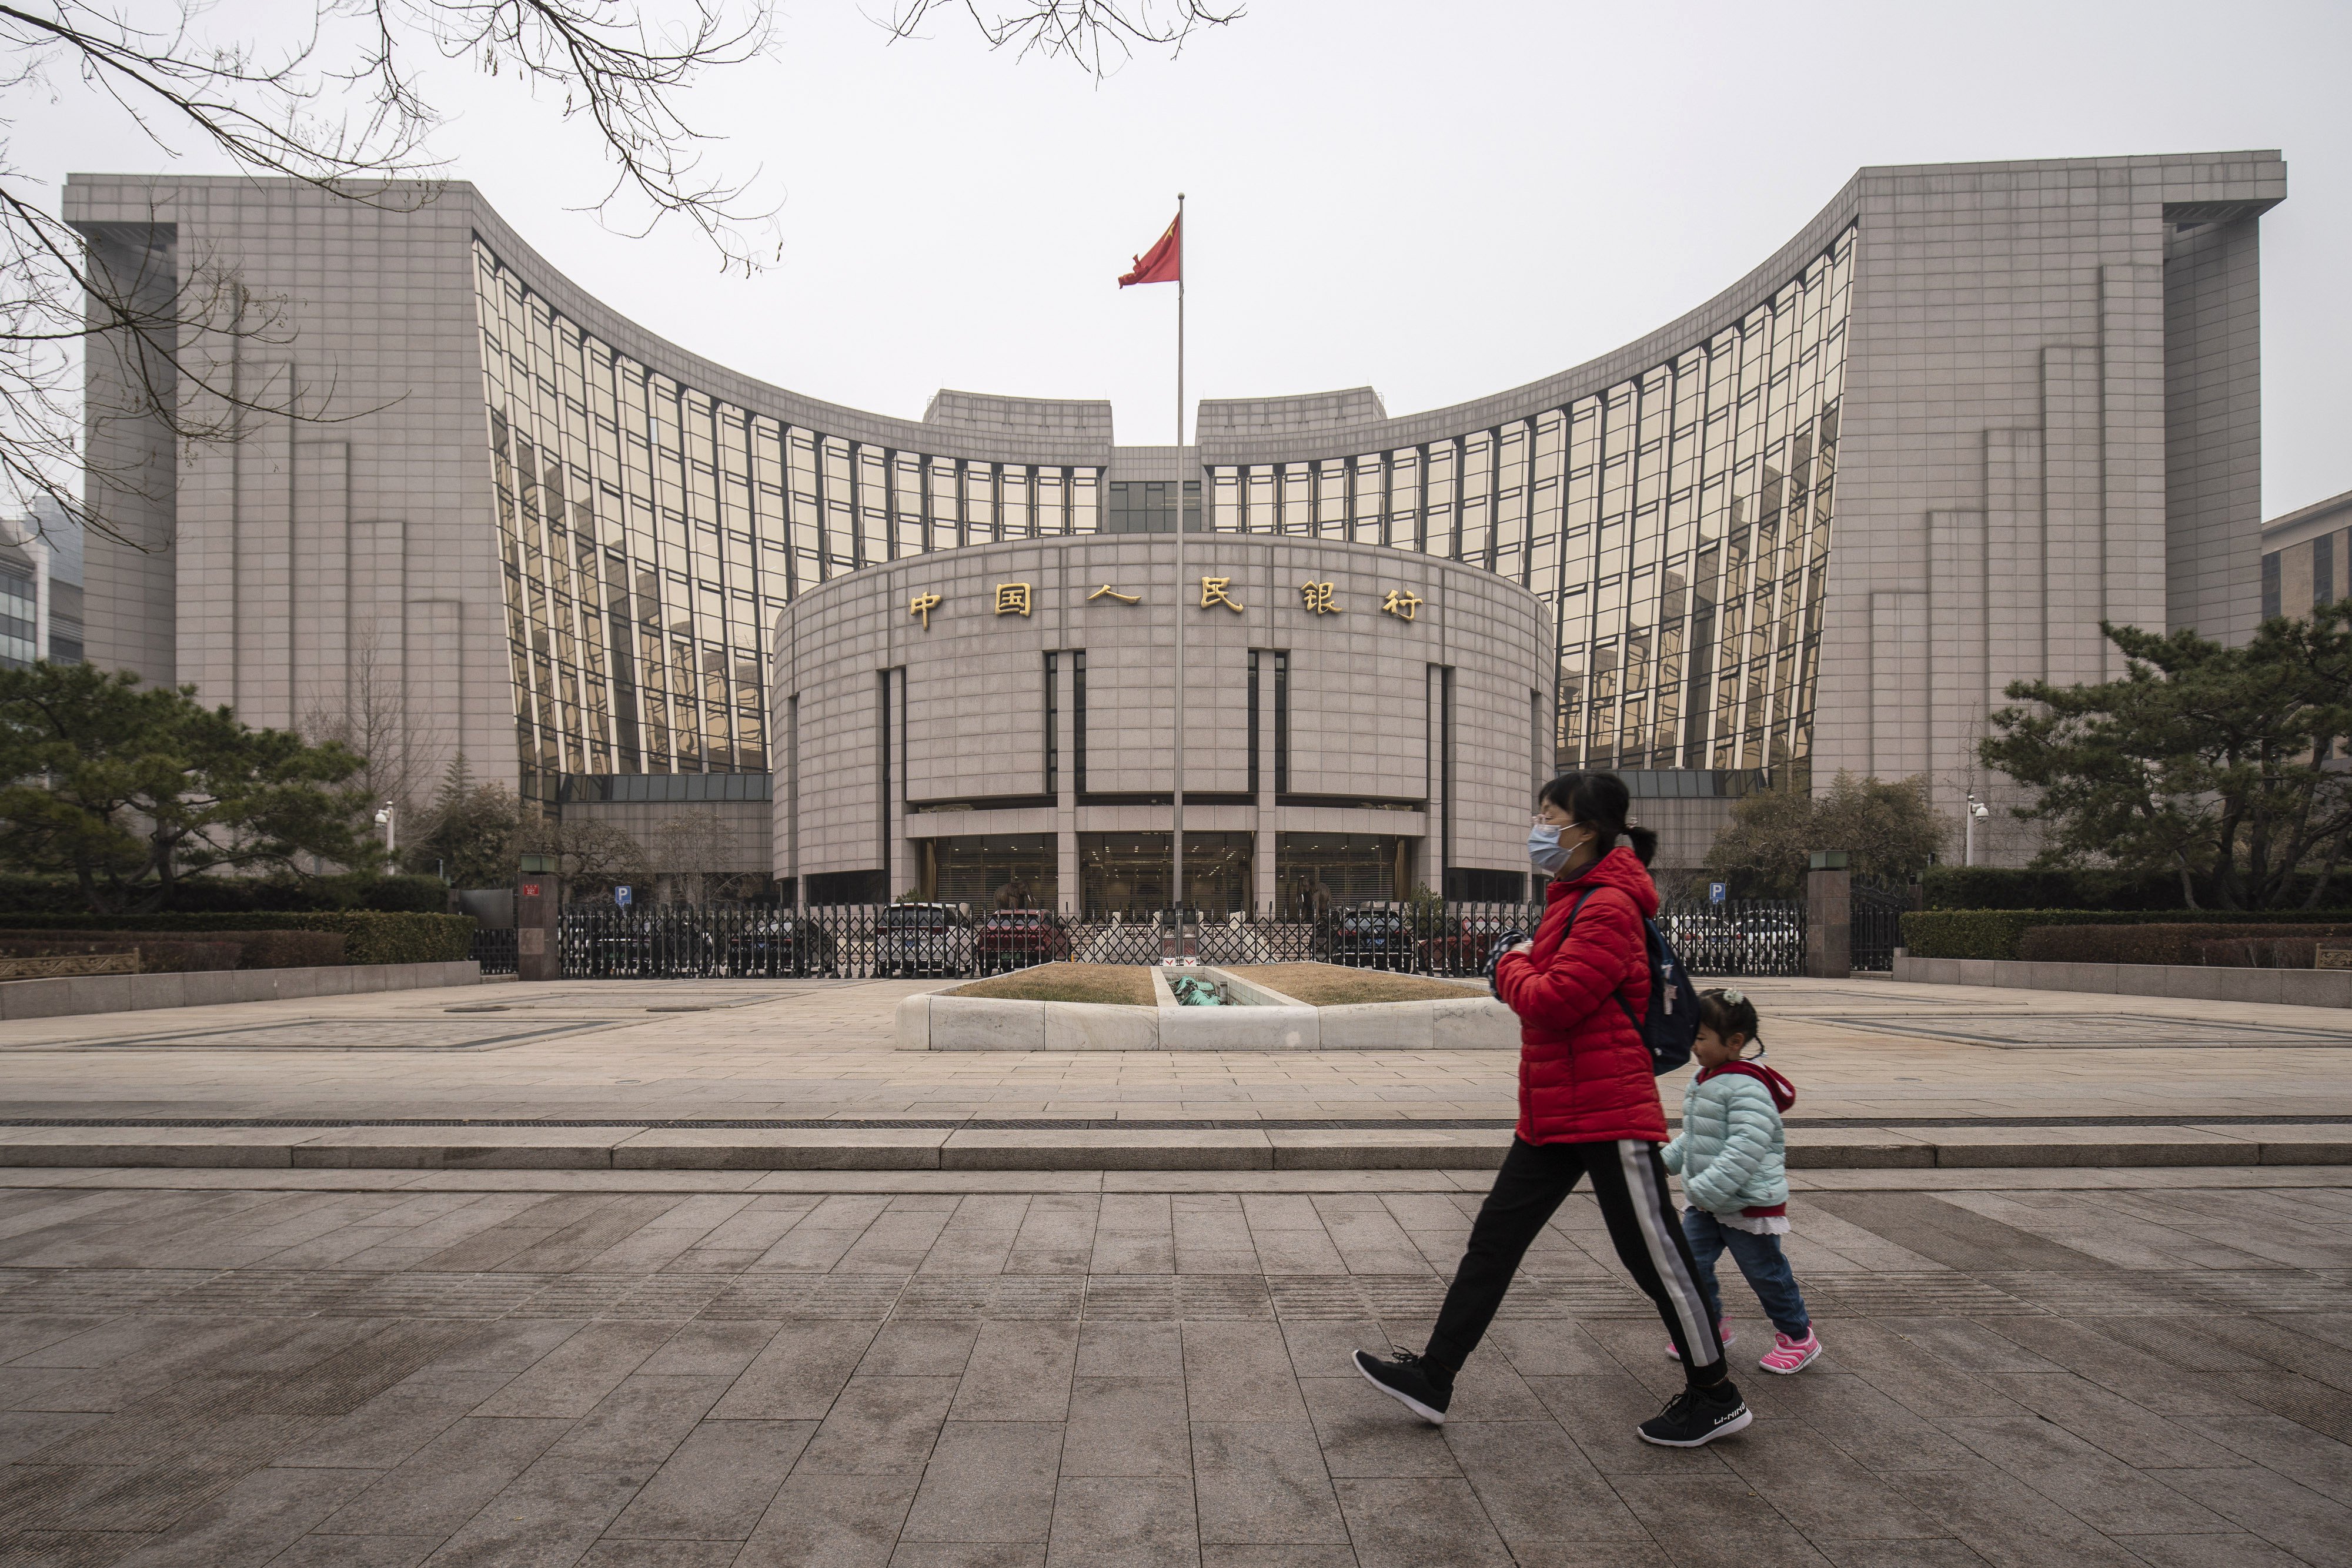 The PBOC and other top financial regulators have summoned fintech platforms and told them to curb unfair practices. Photo: Bloomberg